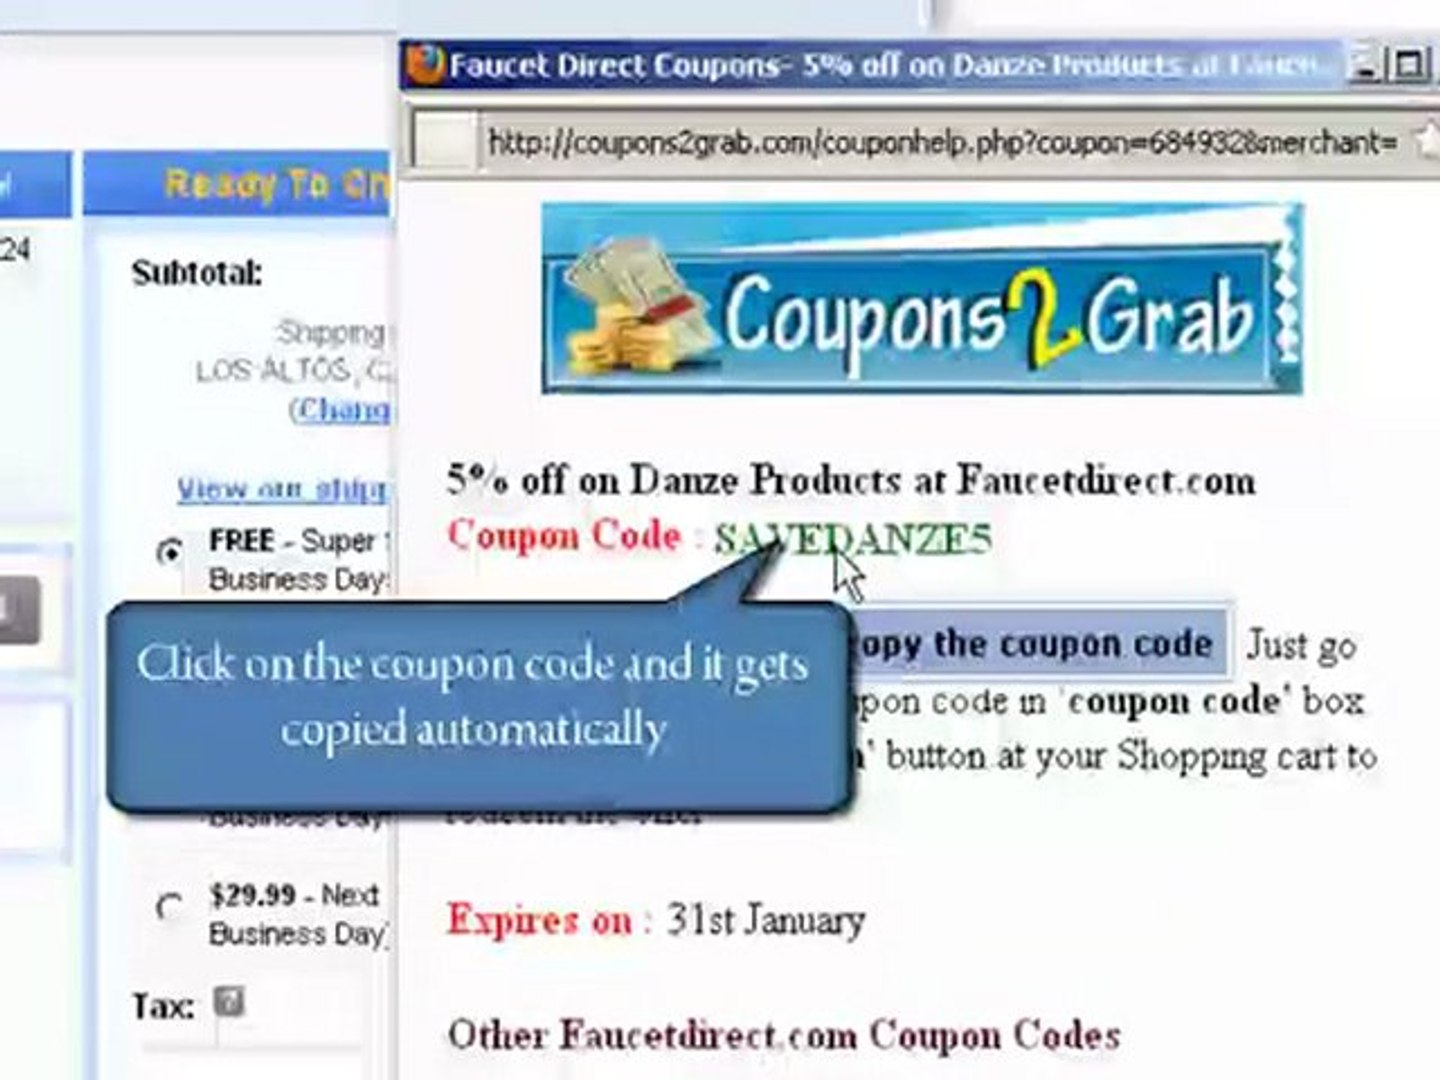 Faucet Direct Discount Coupons Coupons2grab Video Dailymotion